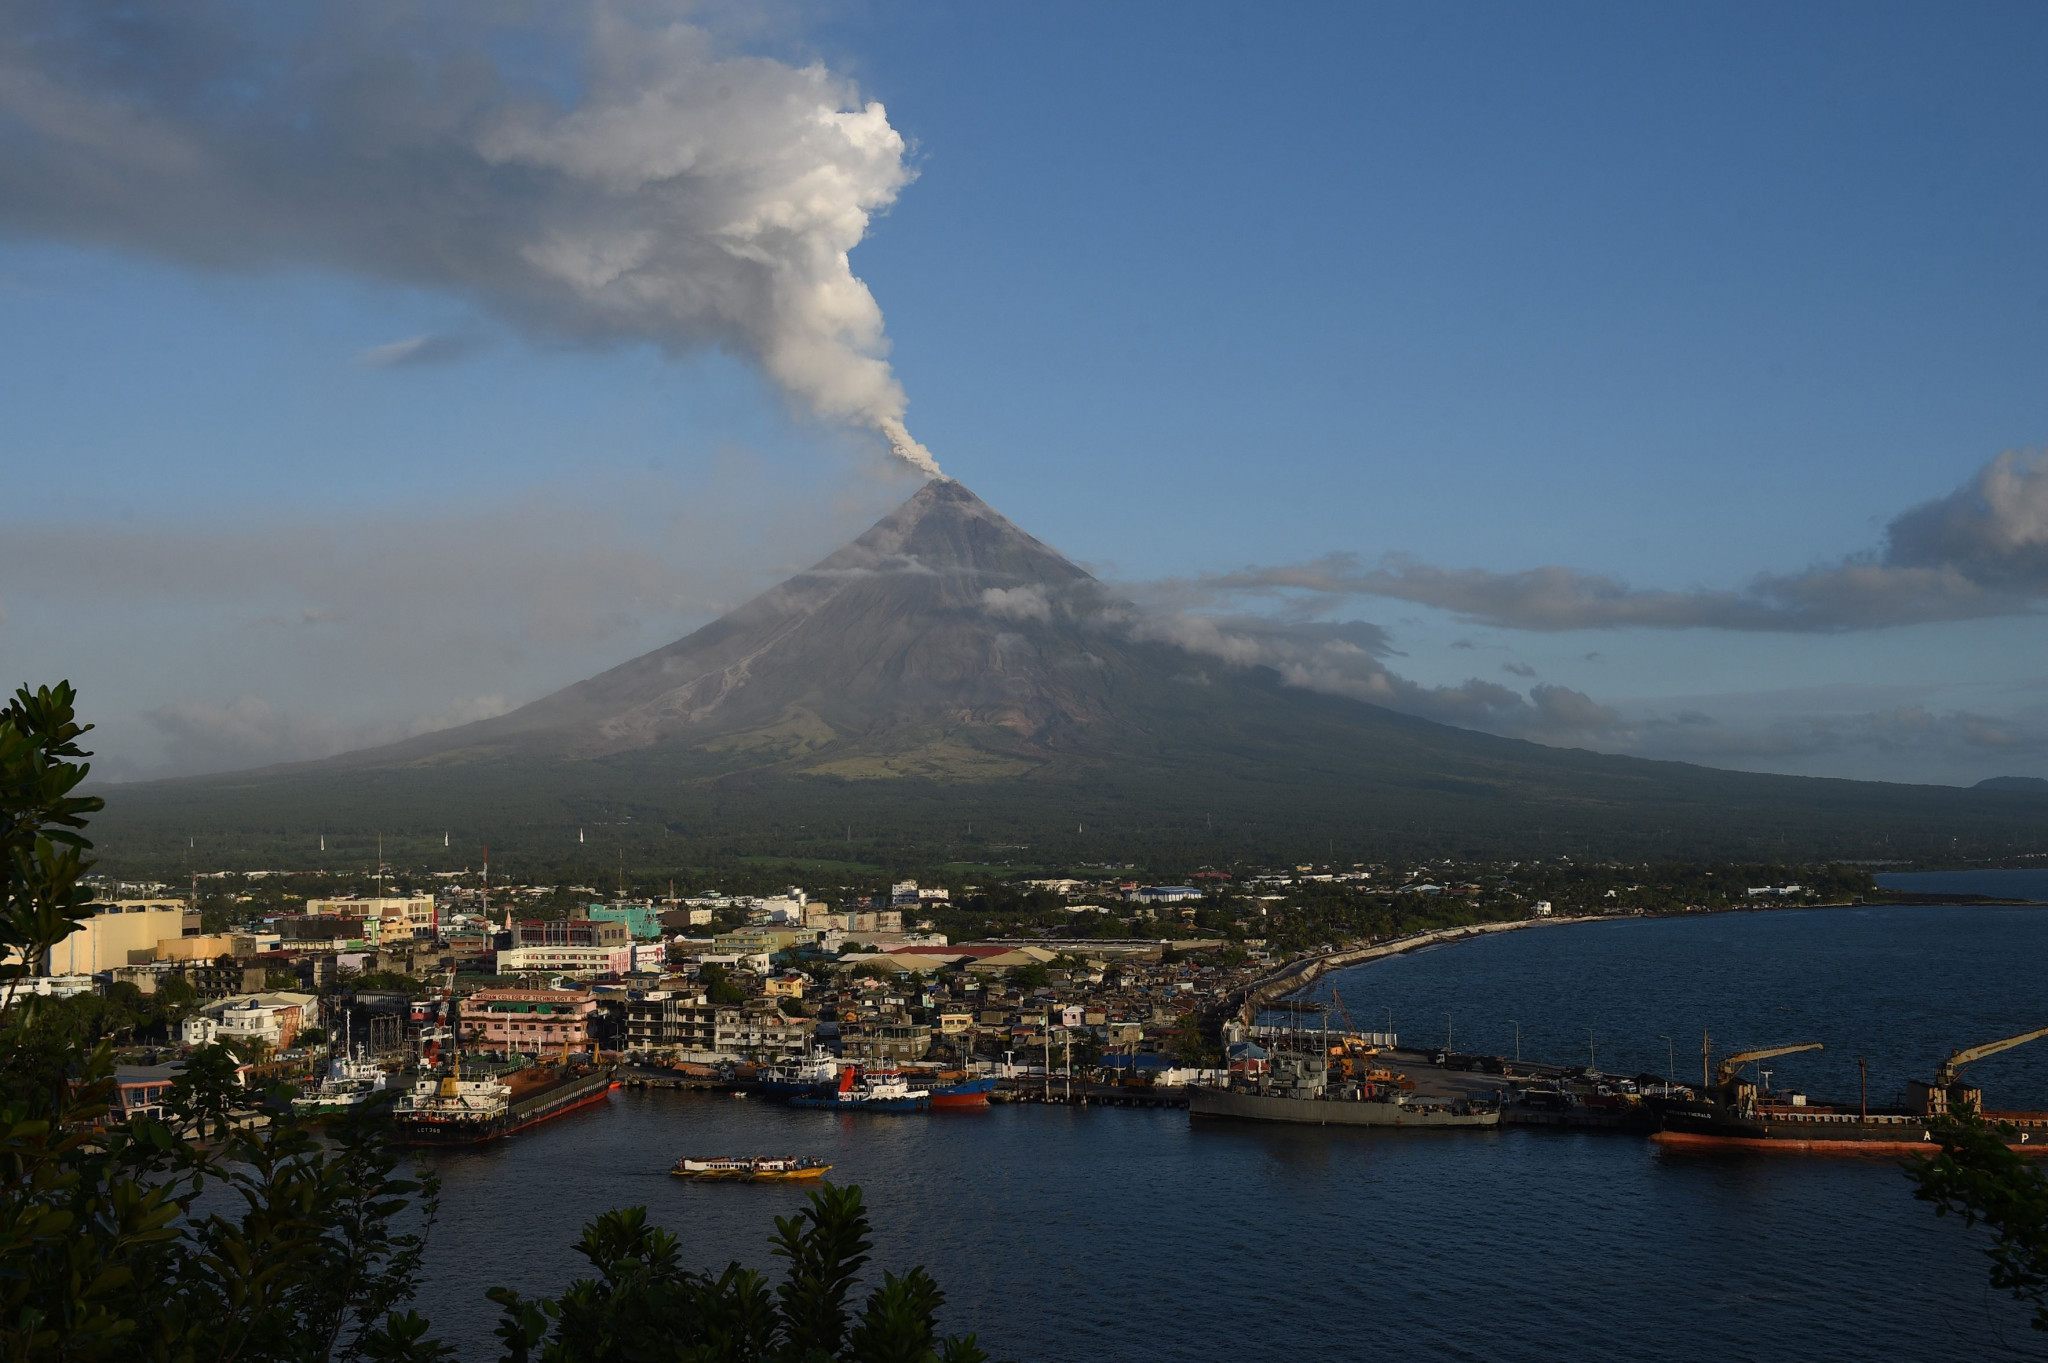 The event is due to be held in the city of Legazpi ©Getty Images